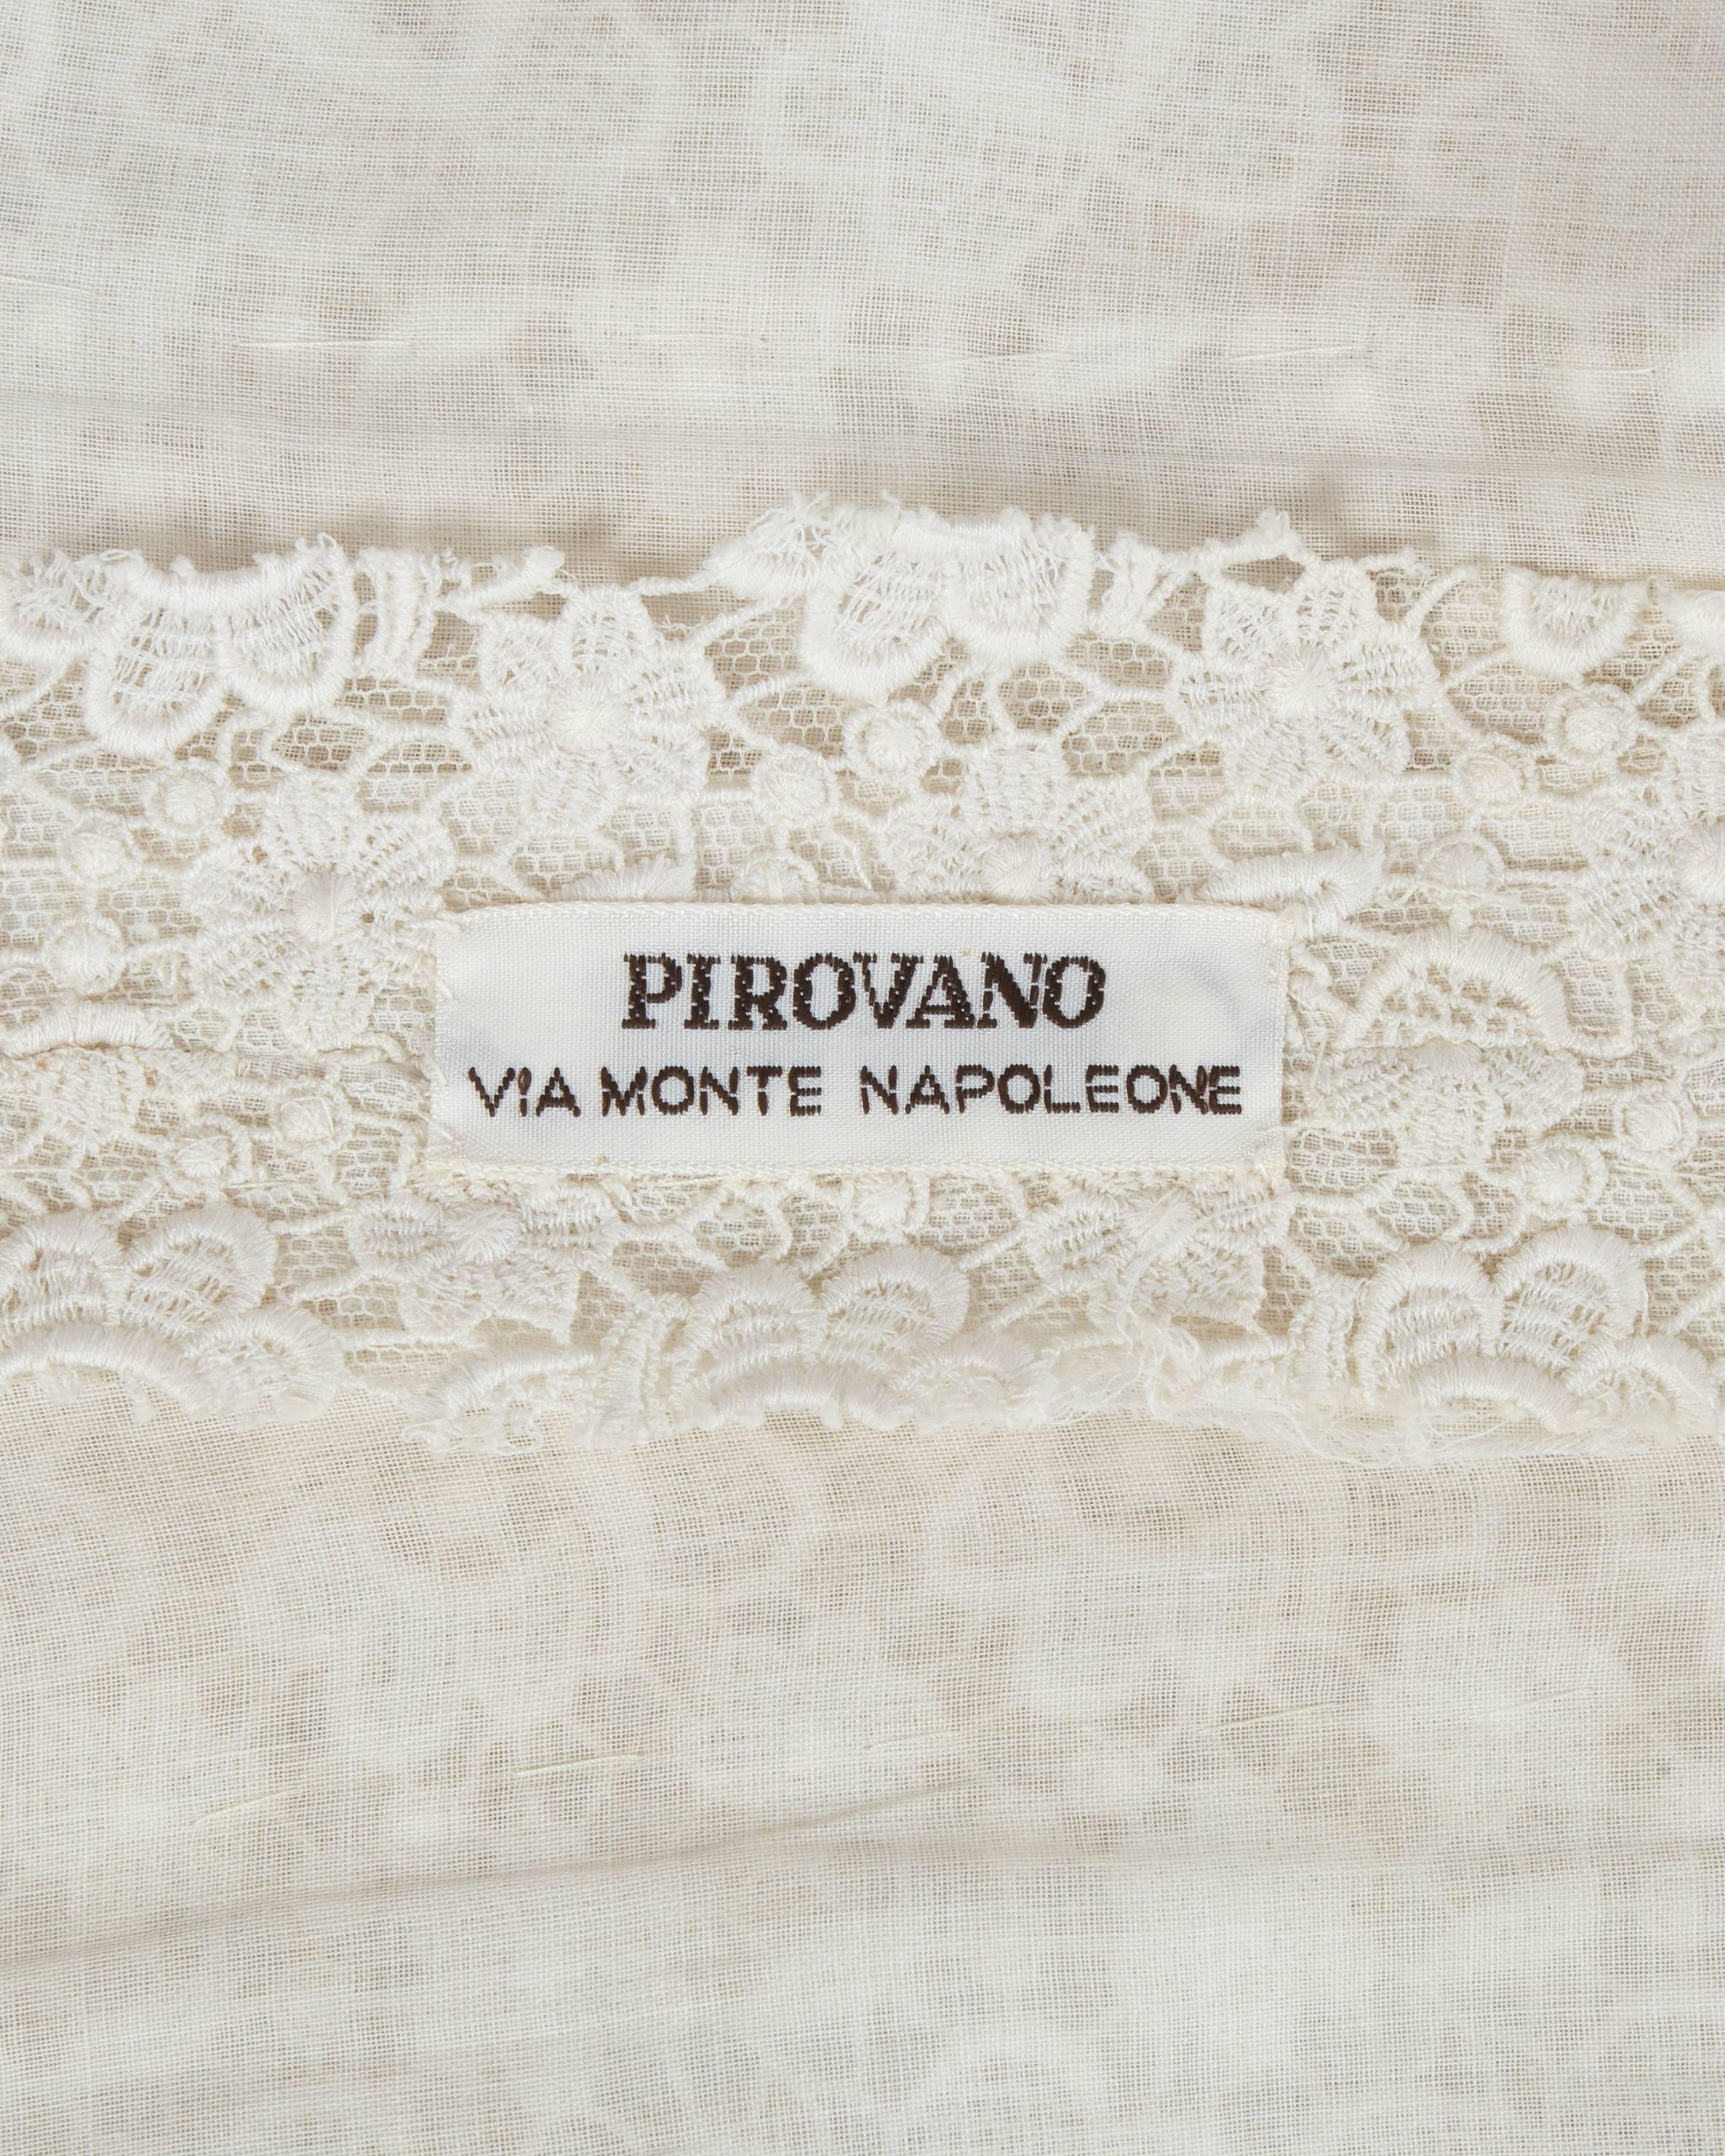 Beige Pirovano Italian couture ivory lace and linen summer shirt dress, c. 1960s